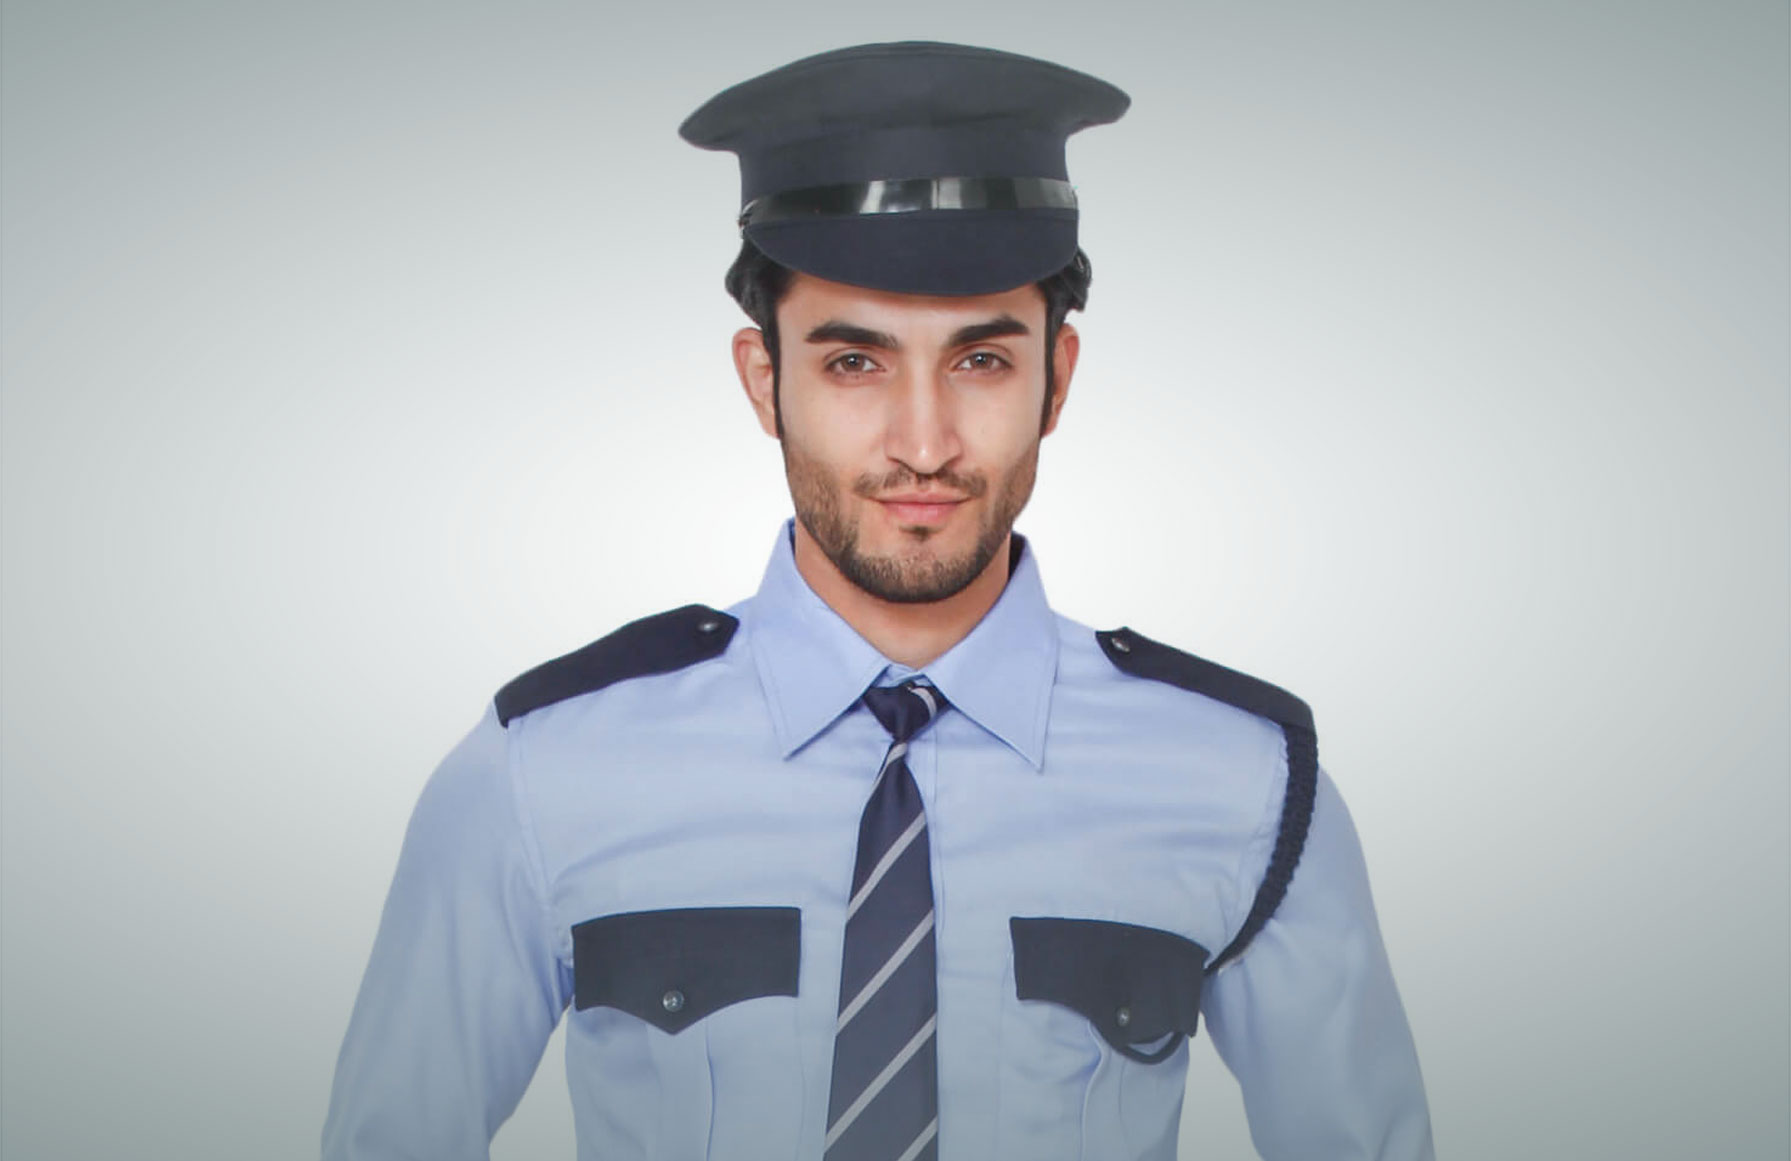 Security Uniforms from Layan, UAE